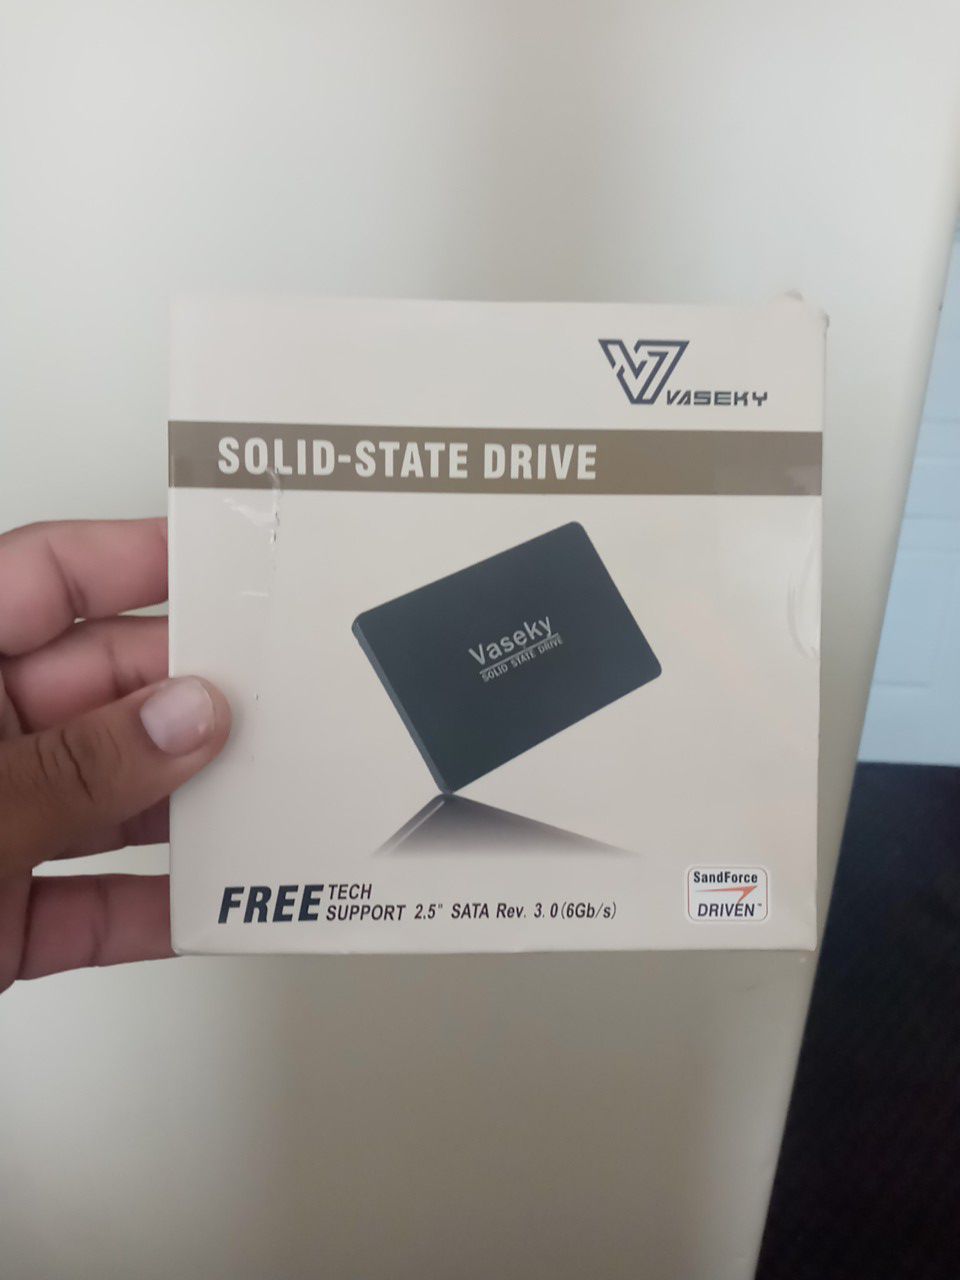 Vaskey solid-state drive